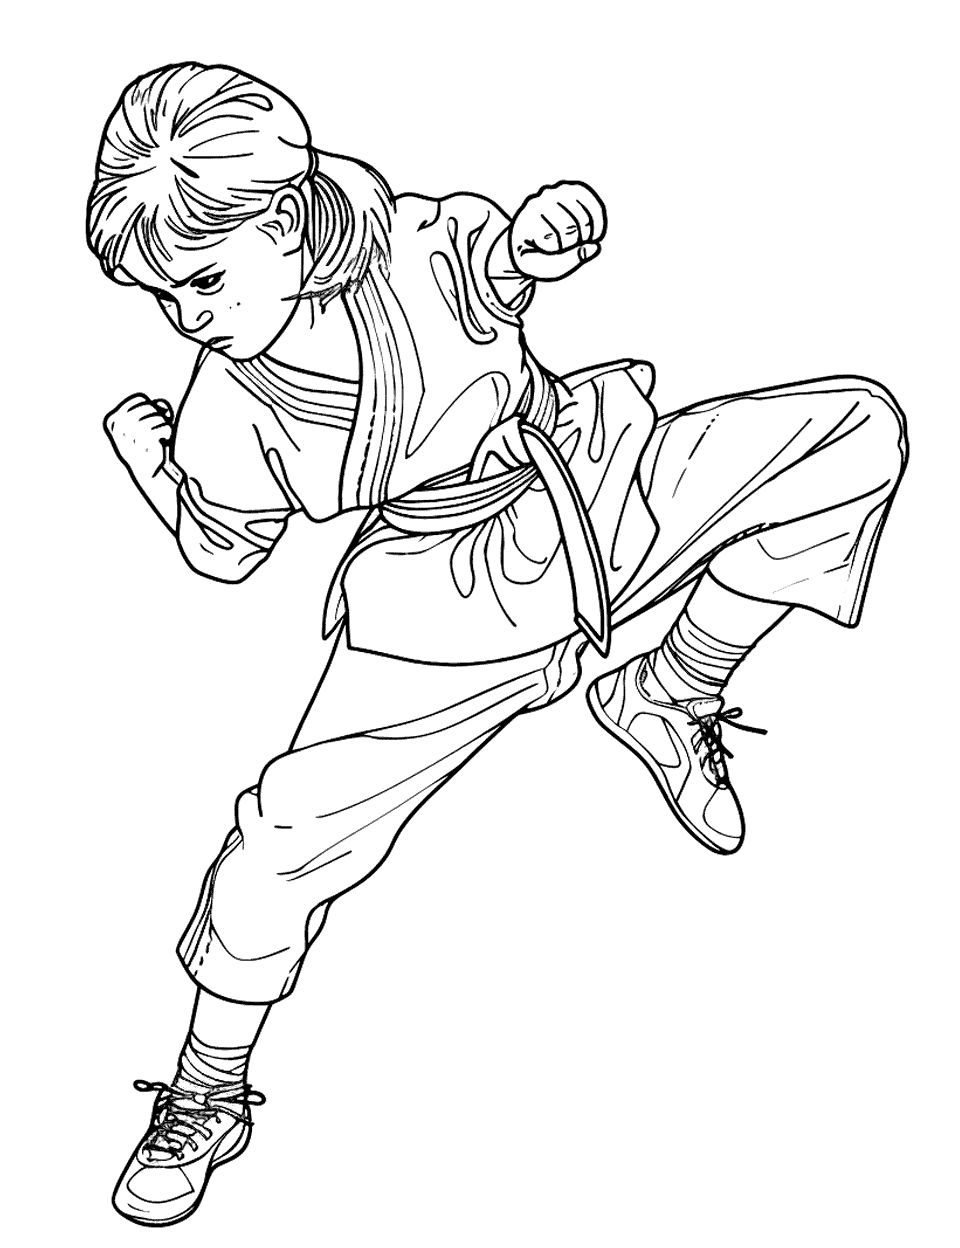 Karate Kid in Action Sports Coloring Page - A child in a karate uniform performing karate moves.